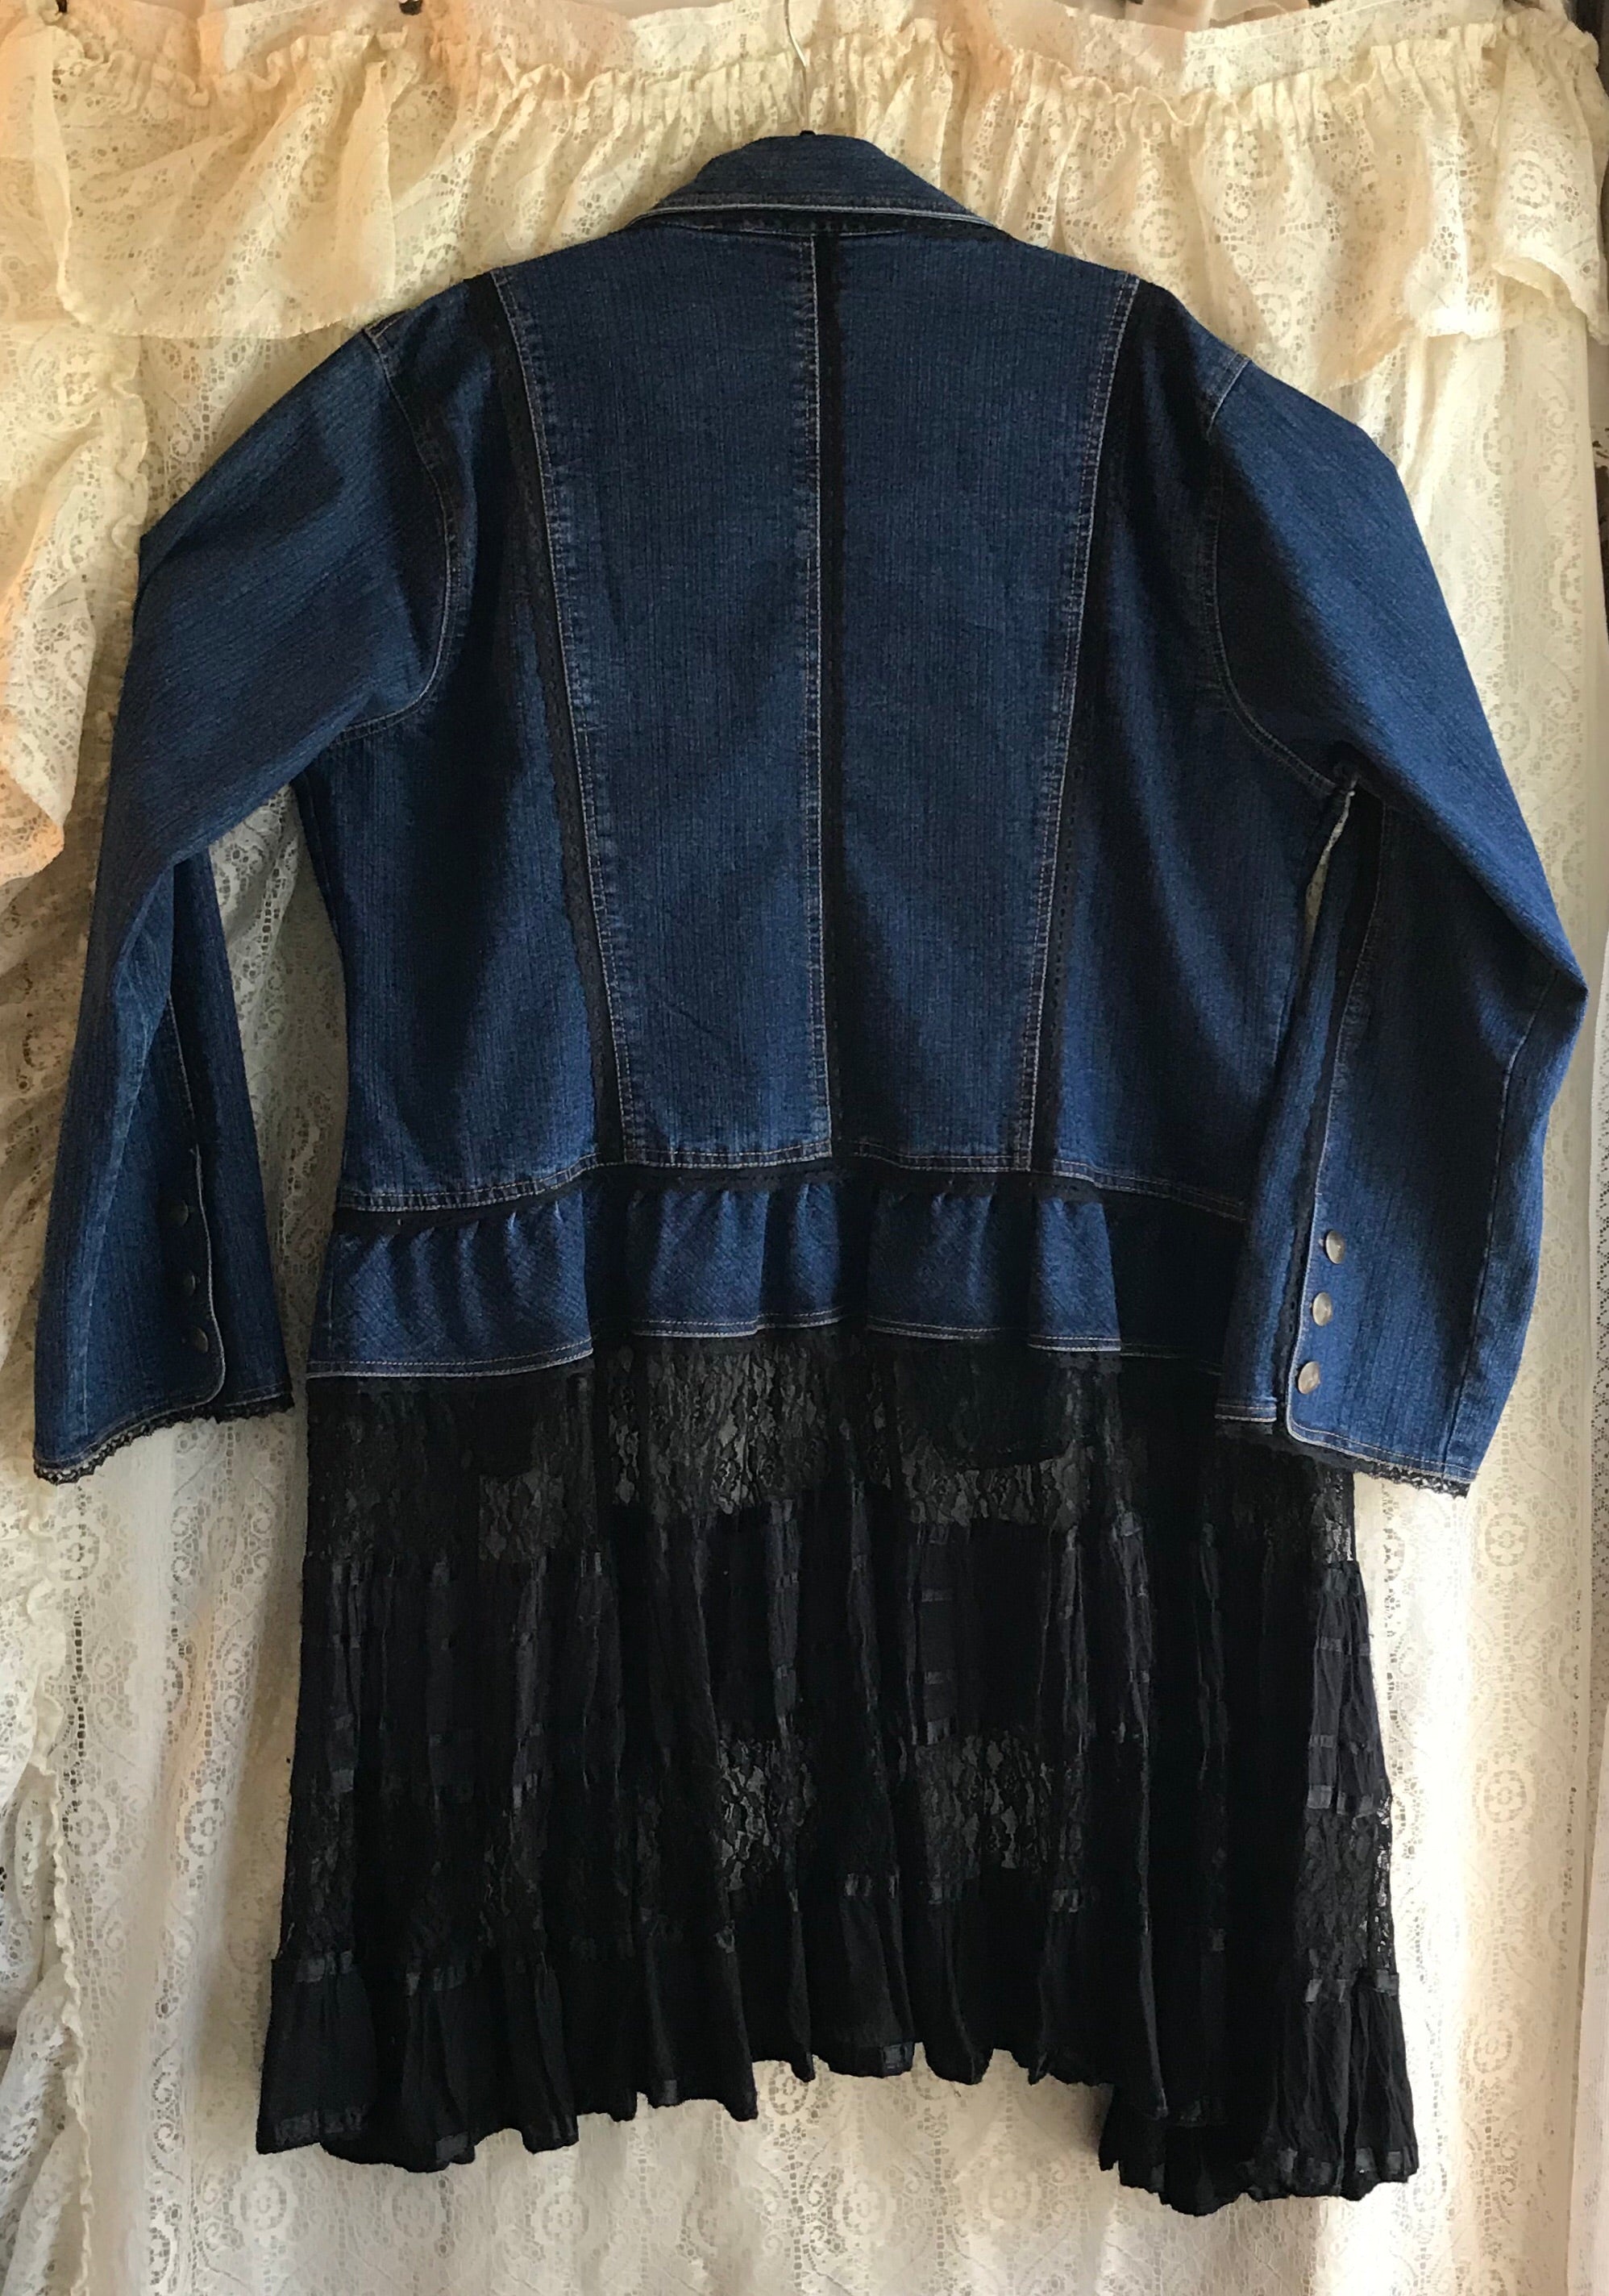 Ladies Denim and Lace Jacket For the Curvy Gal -3XL